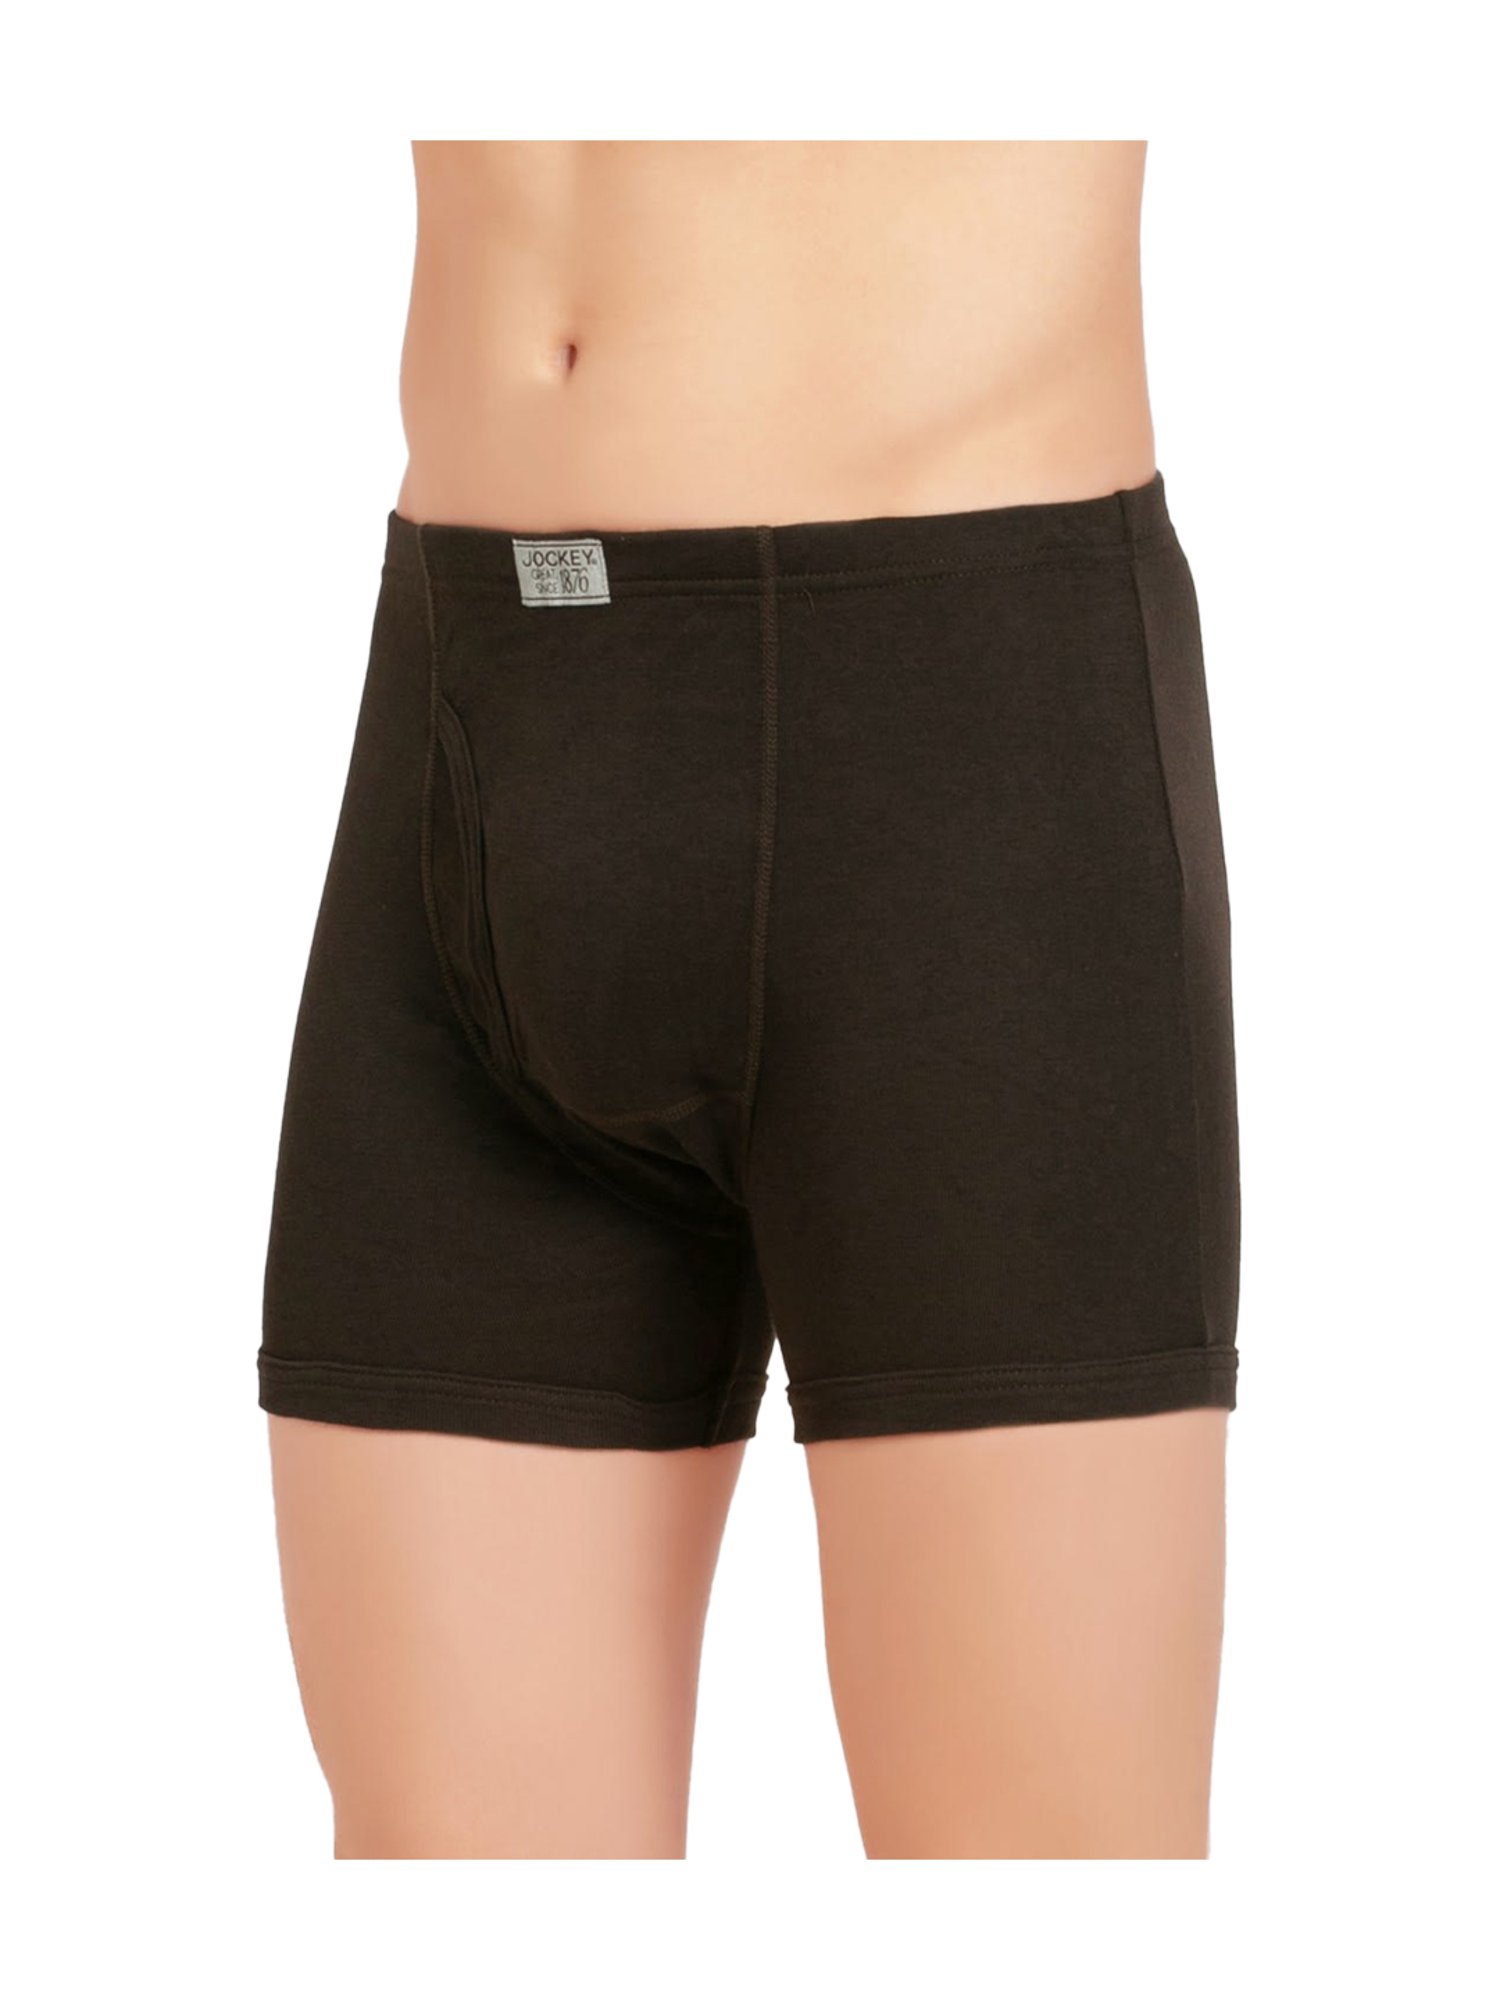 Buy Jockey Chocolate Concealed Waistband Boxer Briefs for Men